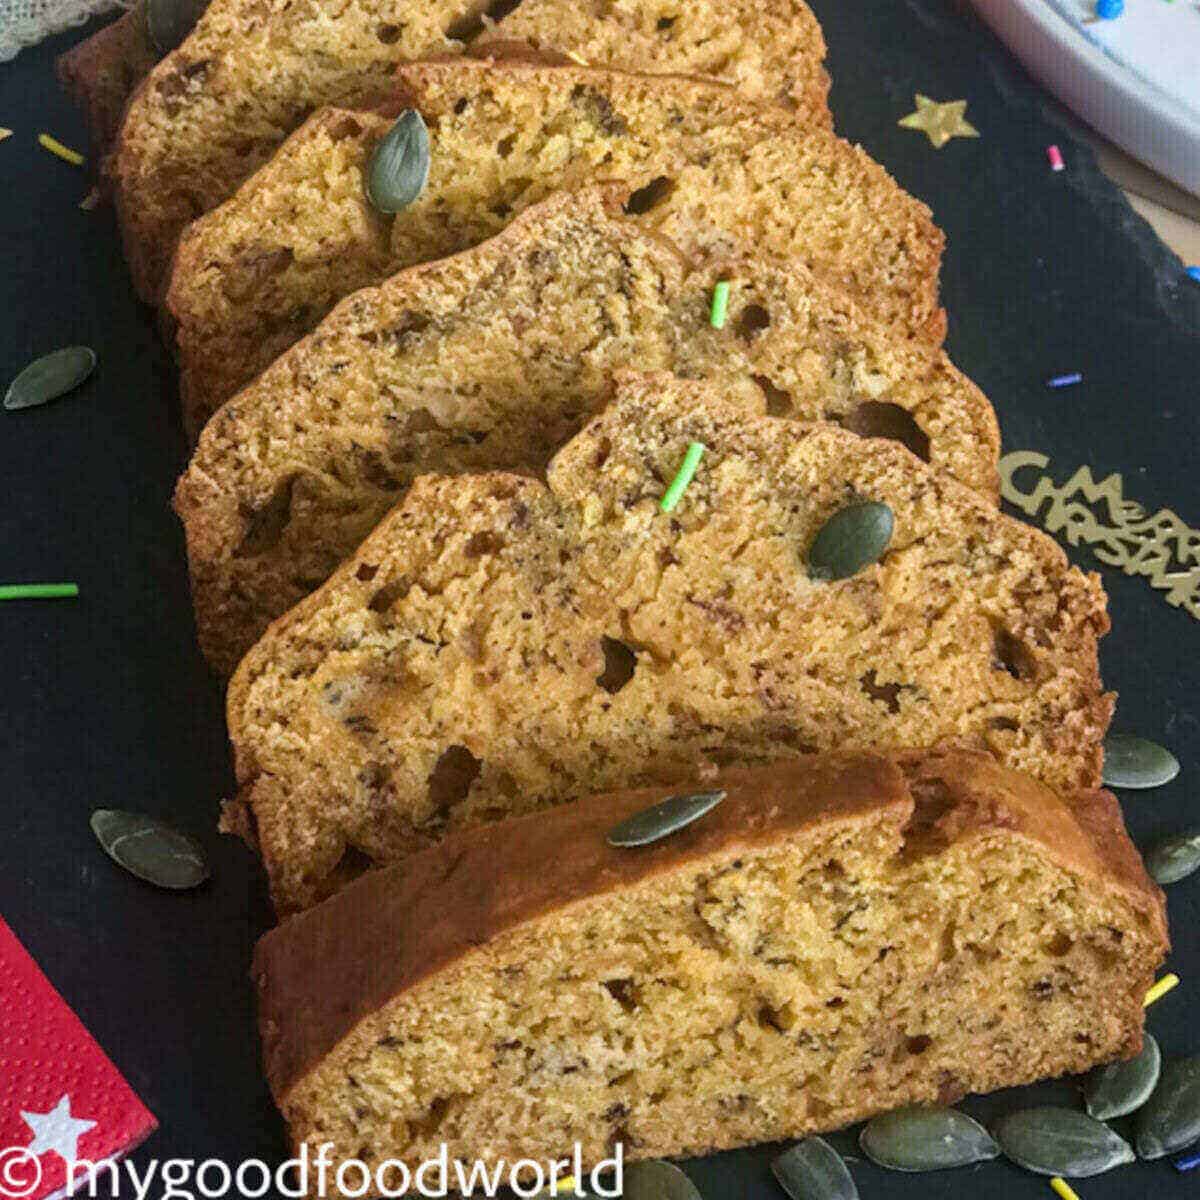 Slices of pumpkin banana bread placed on a black serving board with garnish of pumpkin seeds.